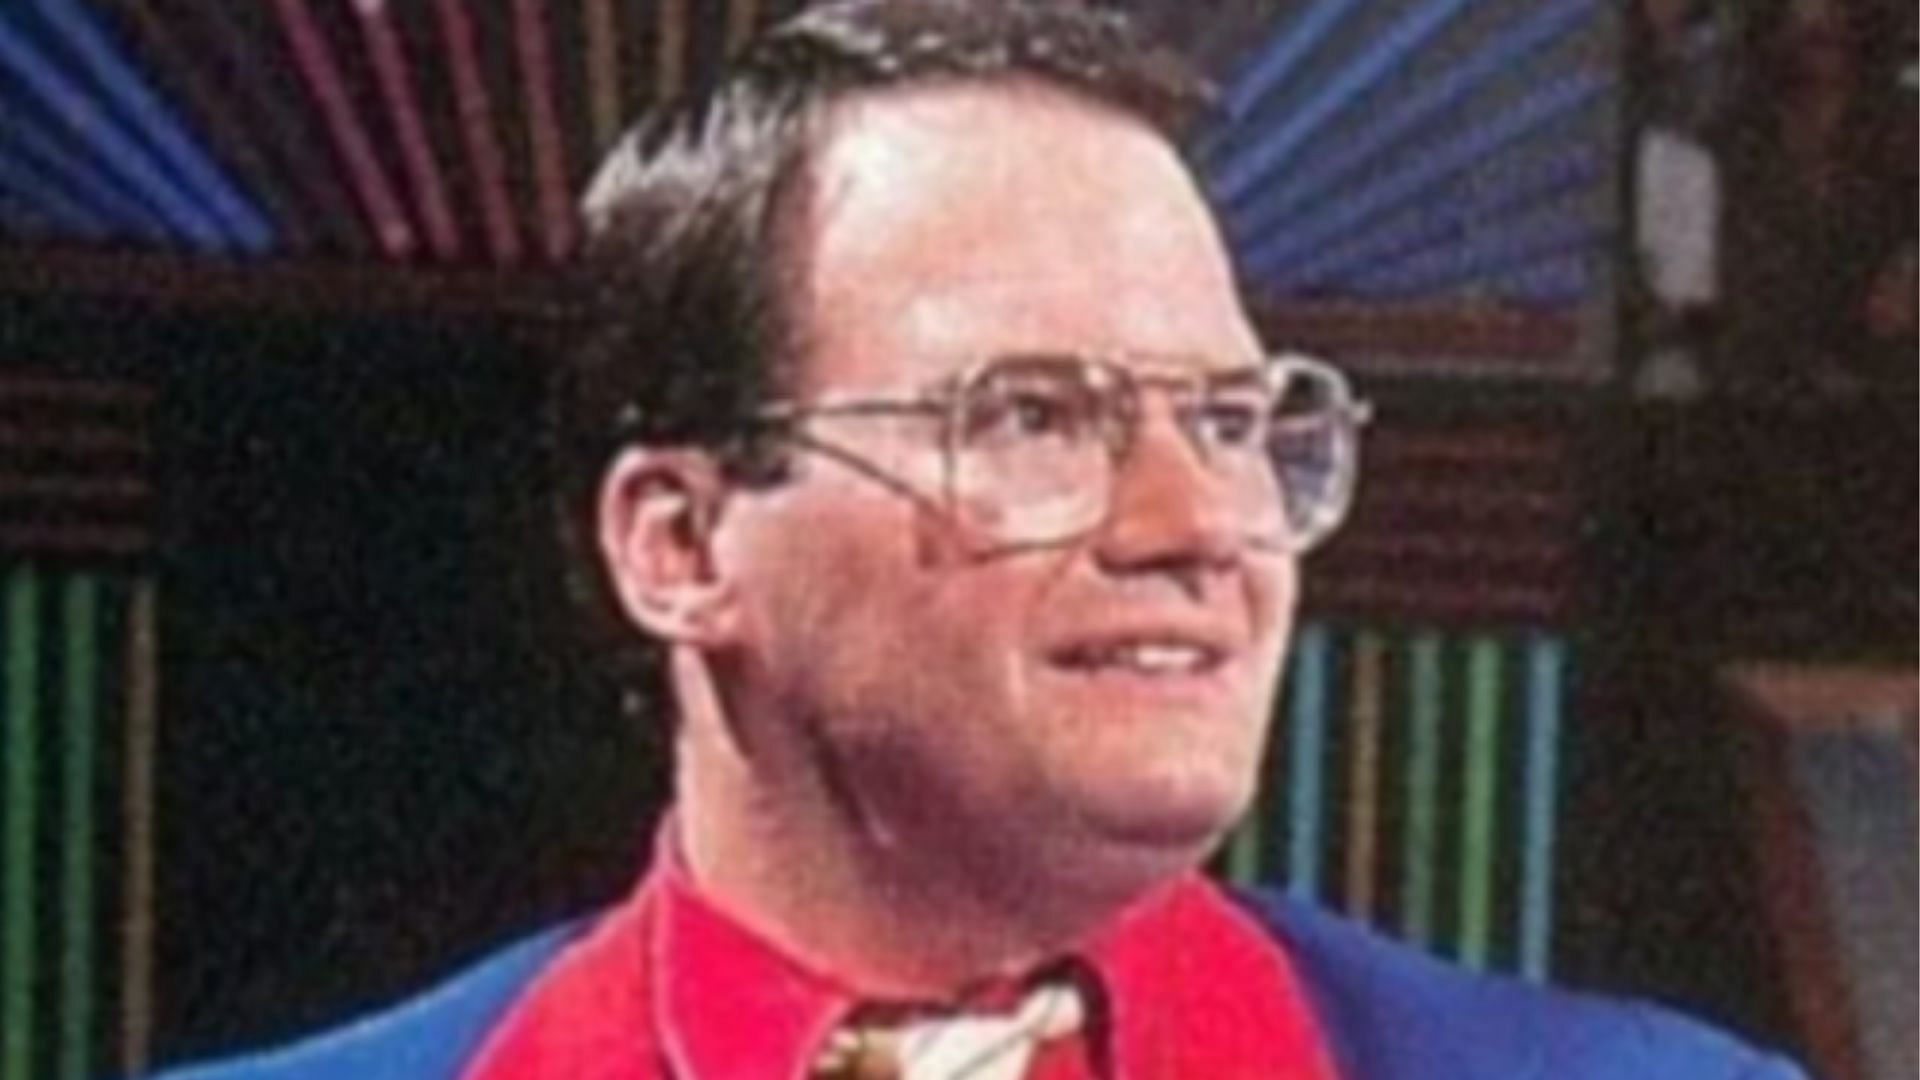 Jim Cornette at ringside during a WWF event